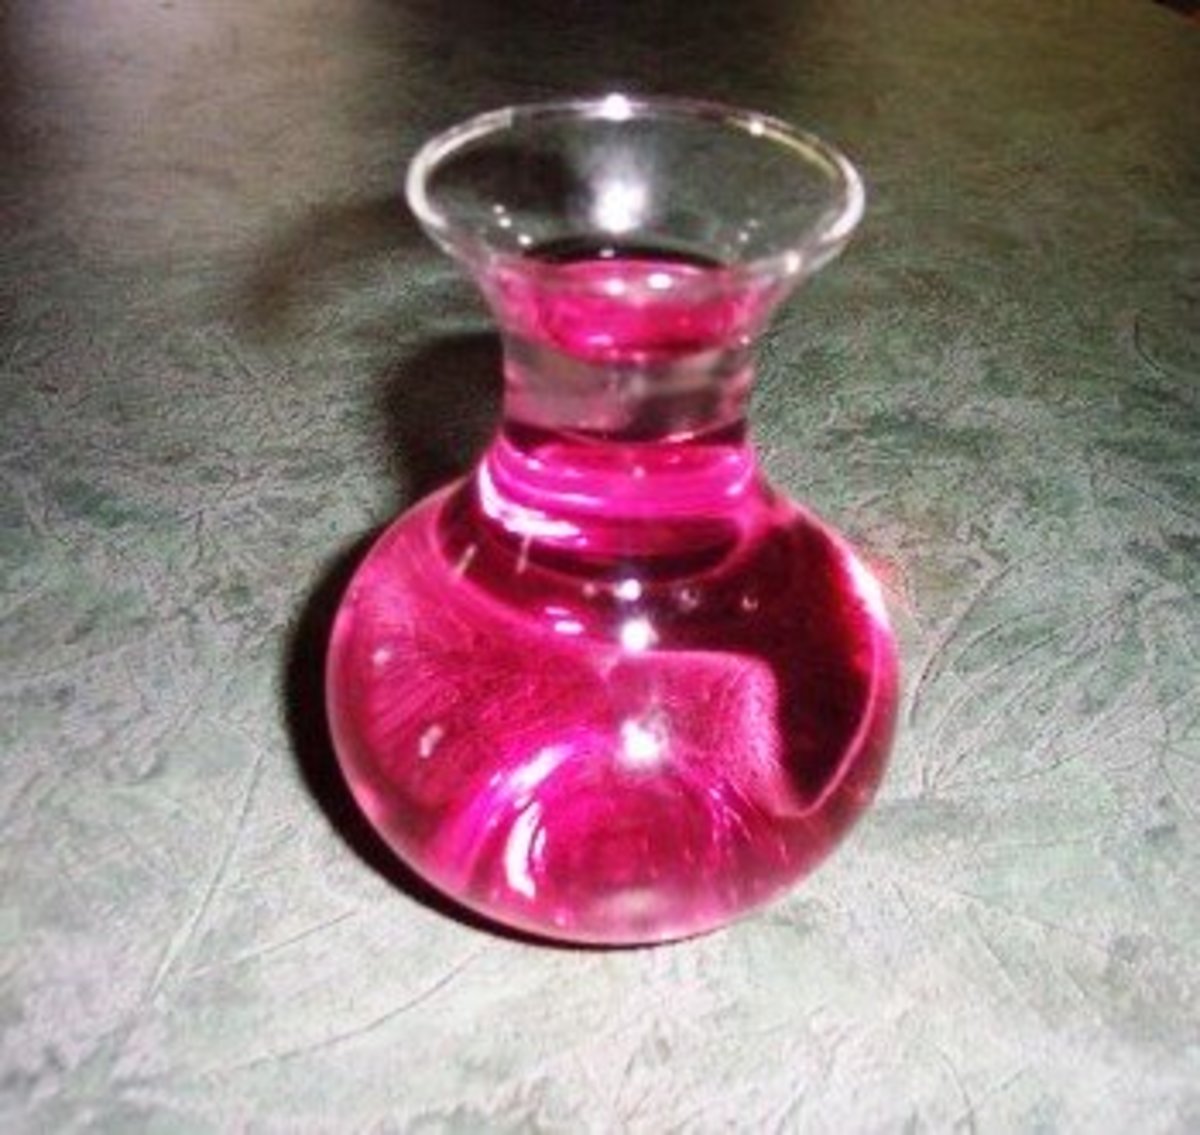 Rose water. Lovely to sample and such a pretty color, too.